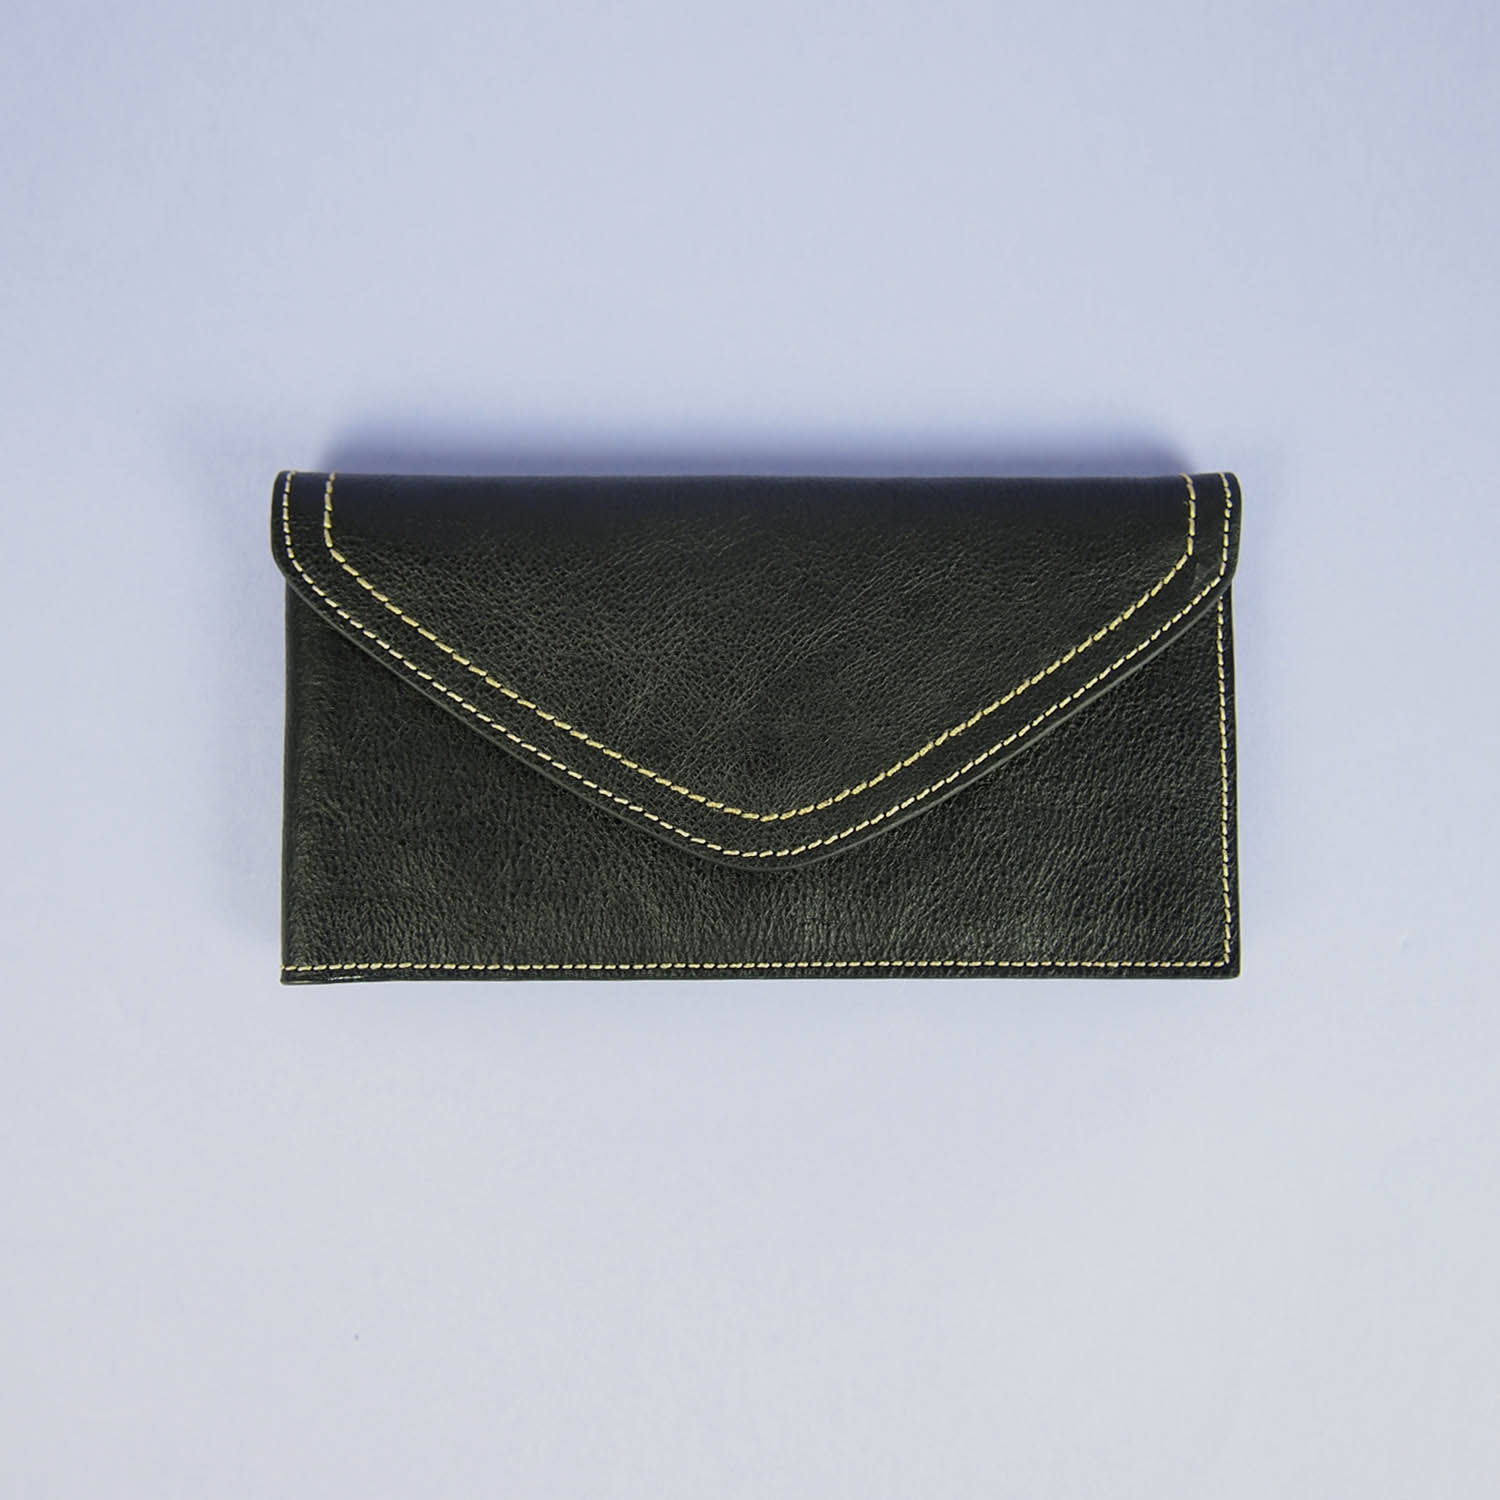 Butterfield bice Wallet Front View